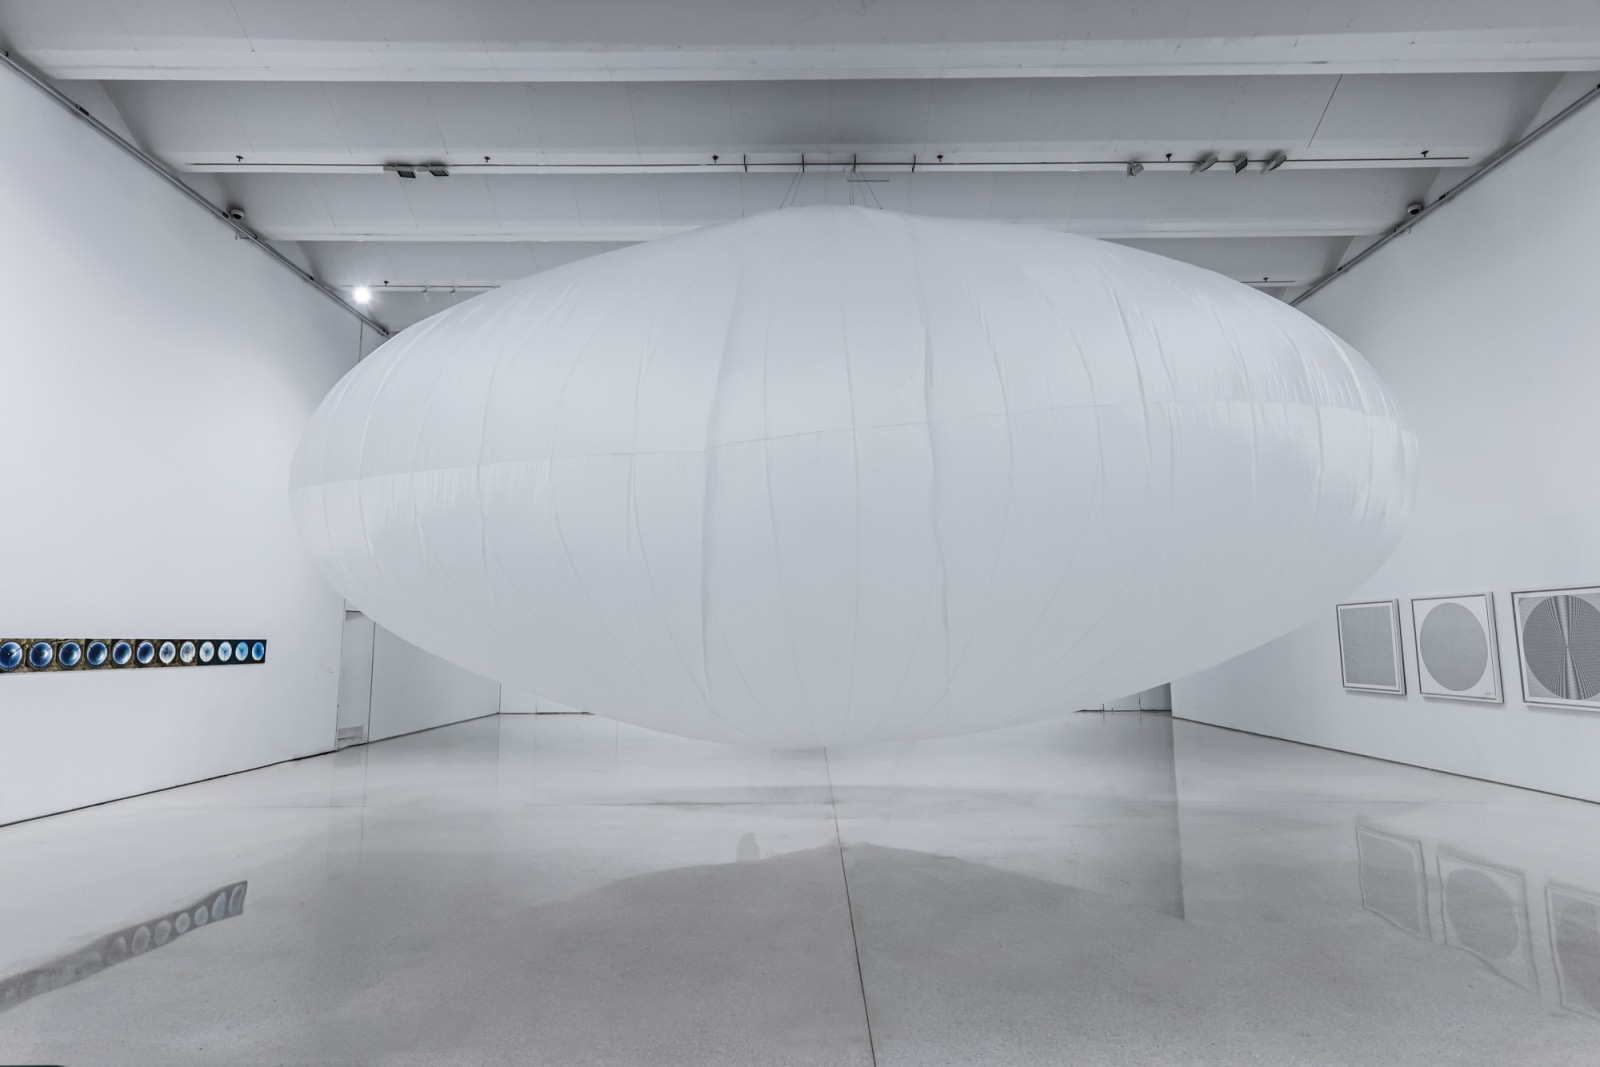 <div class="image_caption_container"><div class="image_caption"><p>Exhibition view: <strong>Wavelength: At the Moment</strong>, Times Art Museum, Beijing, 2018. Photo © Beijing Times Art Museum</p></div></div>